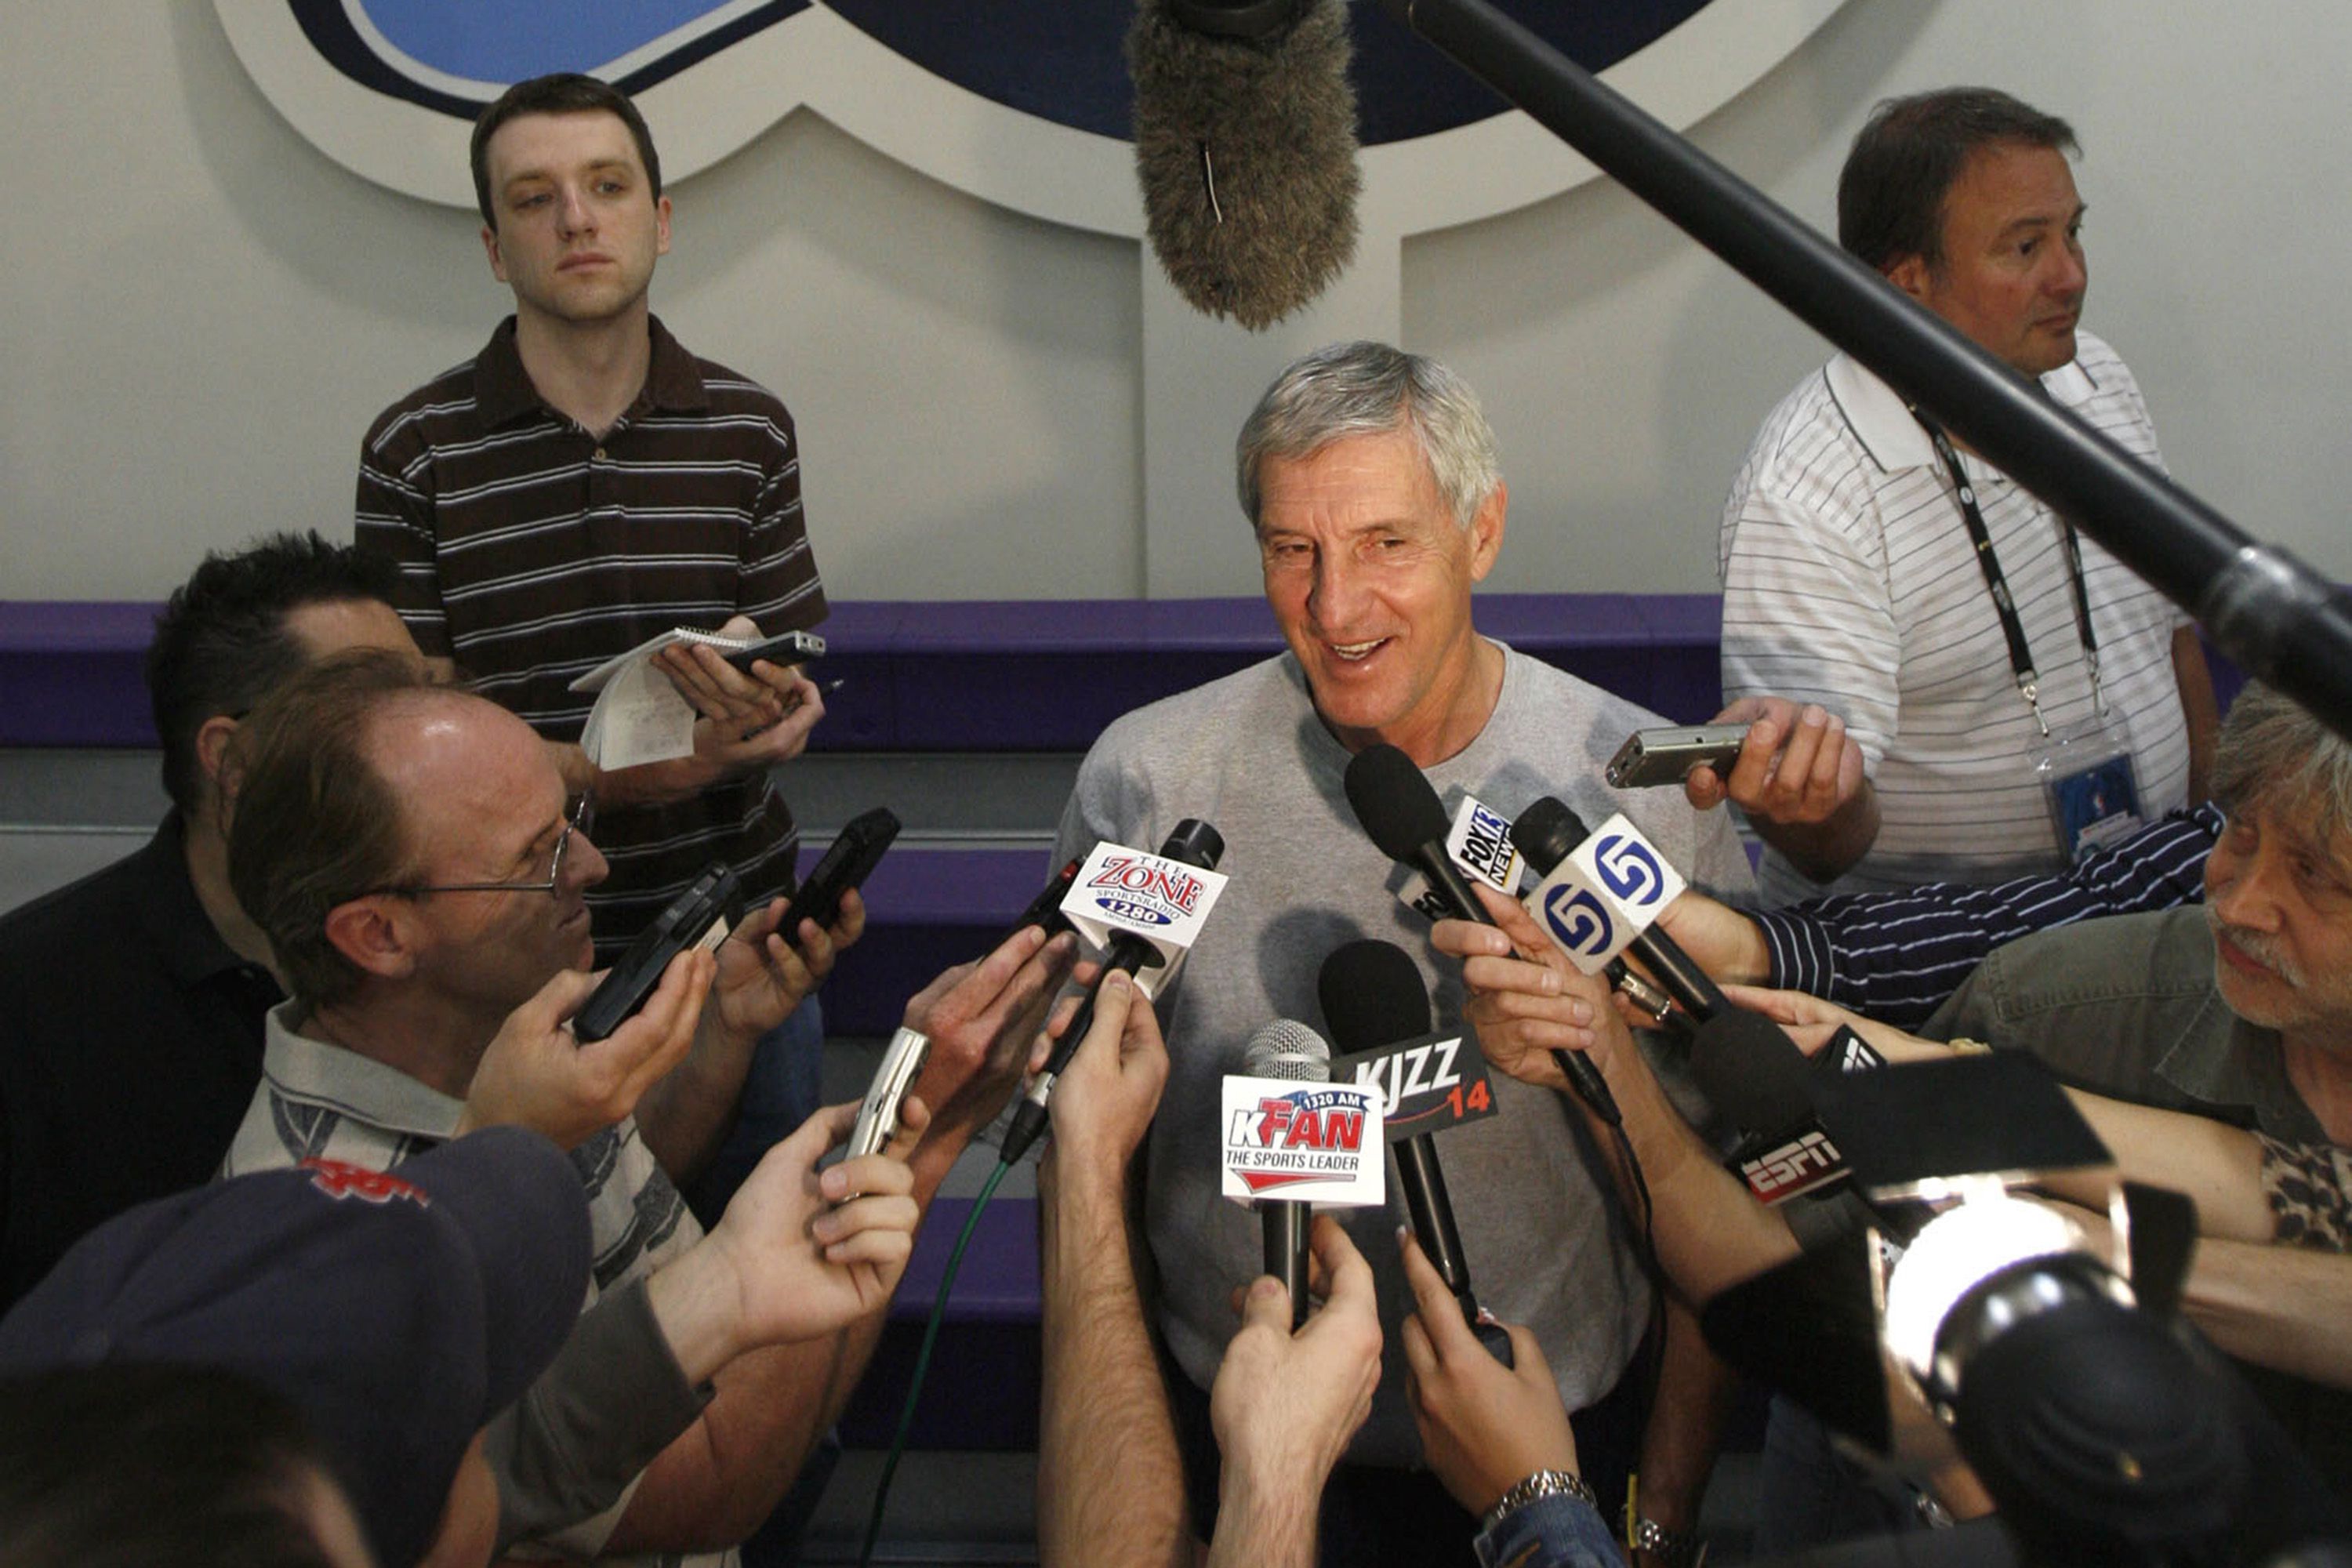 Longtime Jazz coach, Bulls great Jerry Sloan dies at age 78 – NBC Sports  Chicago